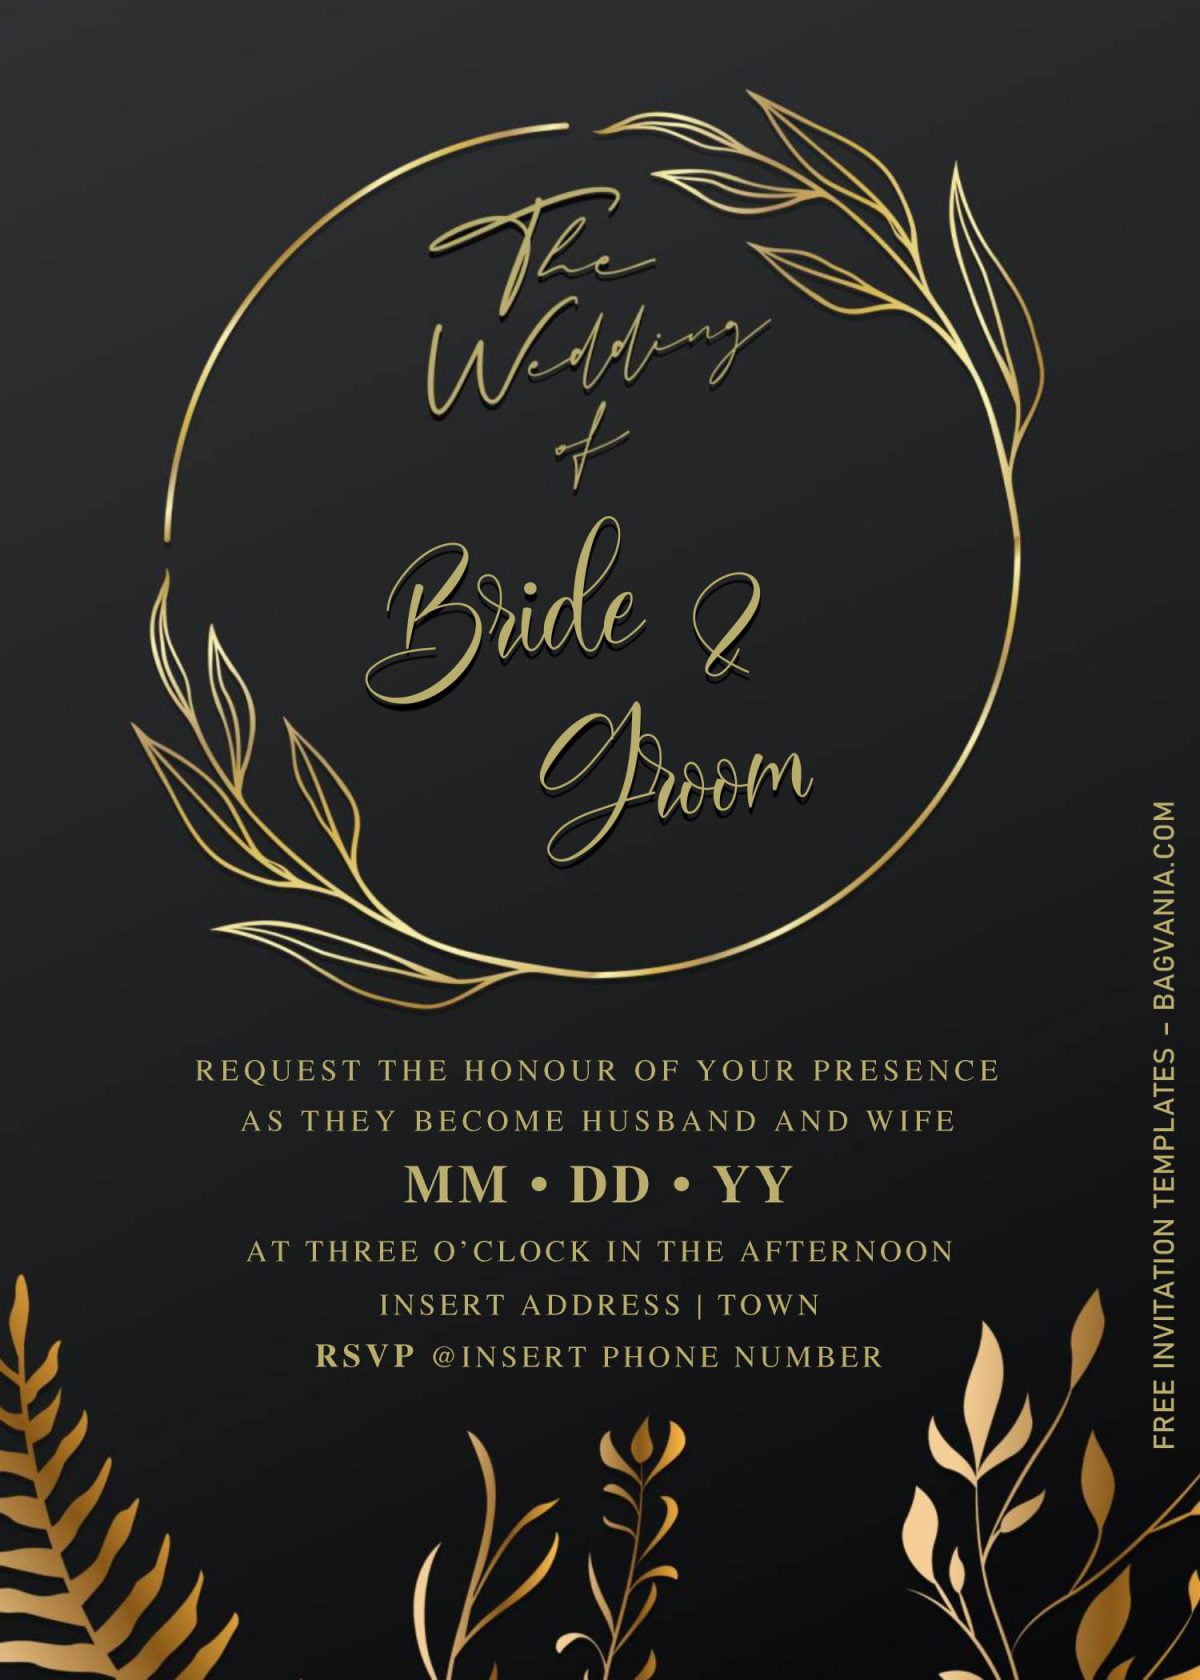 Free Elegant Black And Gold Wedding Invitation Templates For Word and has gold floral frame